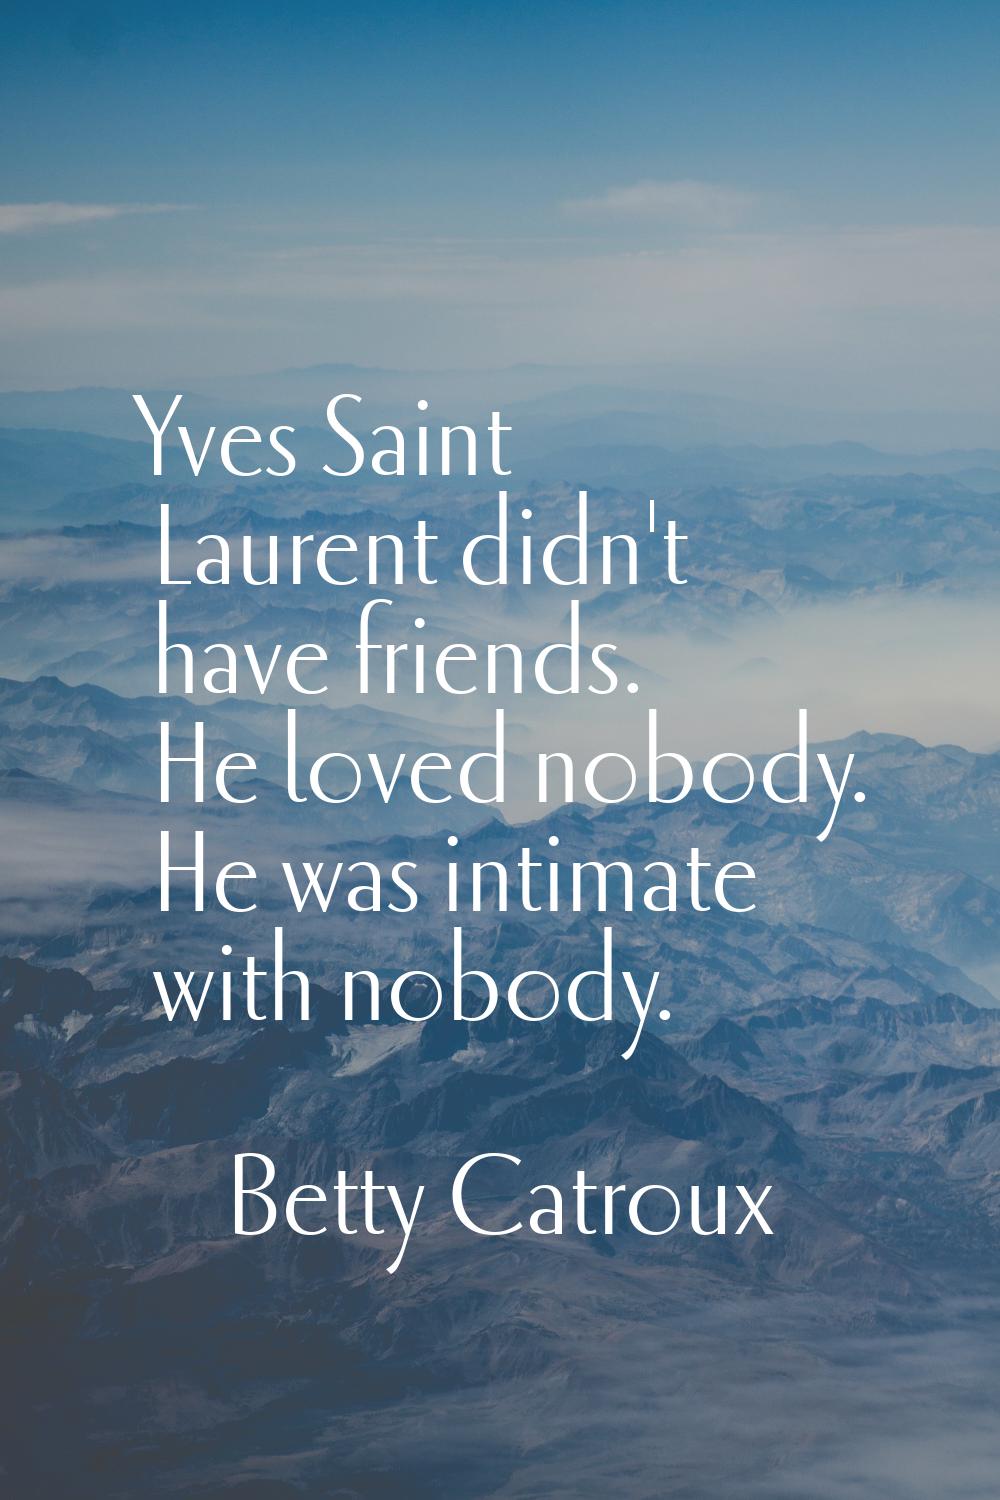 Yves Saint Laurent didn't have friends. He loved nobody. He was intimate with nobody.